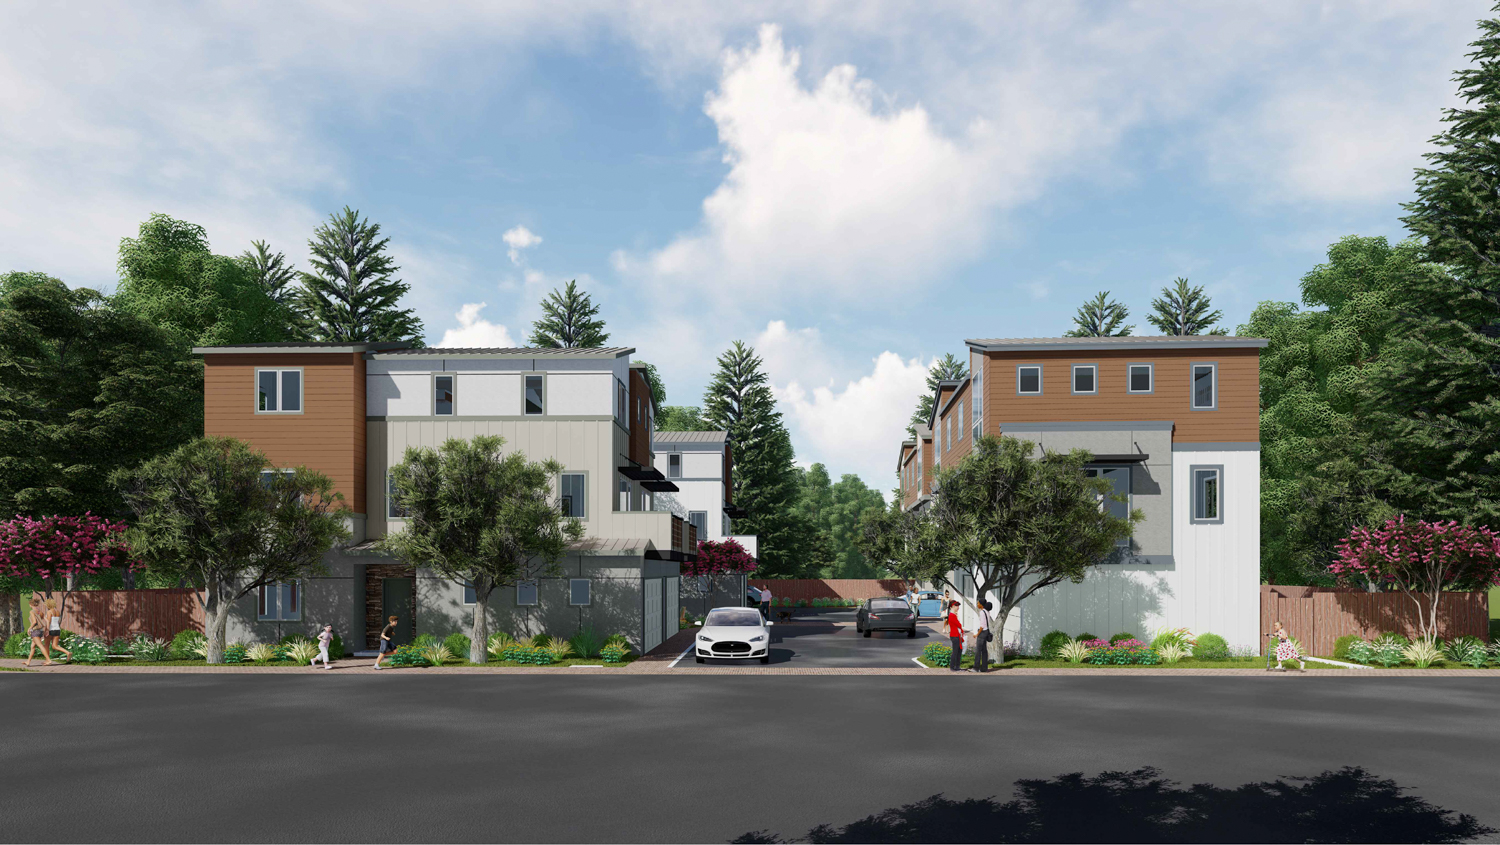 Walden Garden Townhomes looking down the internal driveway, rendering by Edward Novak Architecture